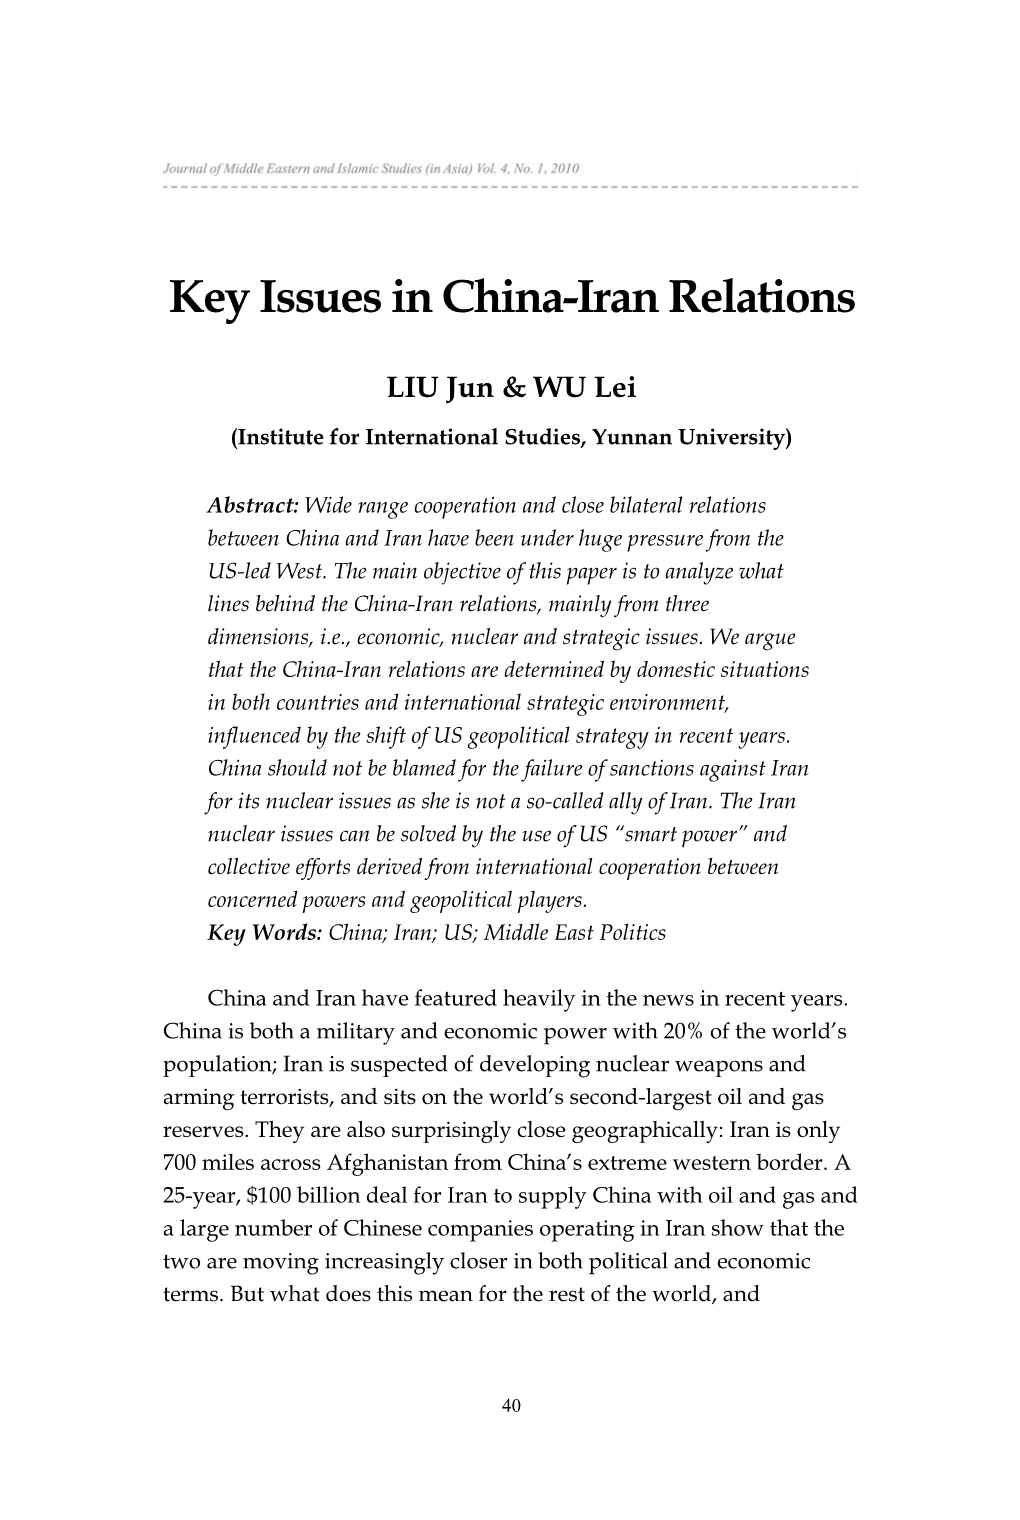 Key Issues in China-Iran Relations